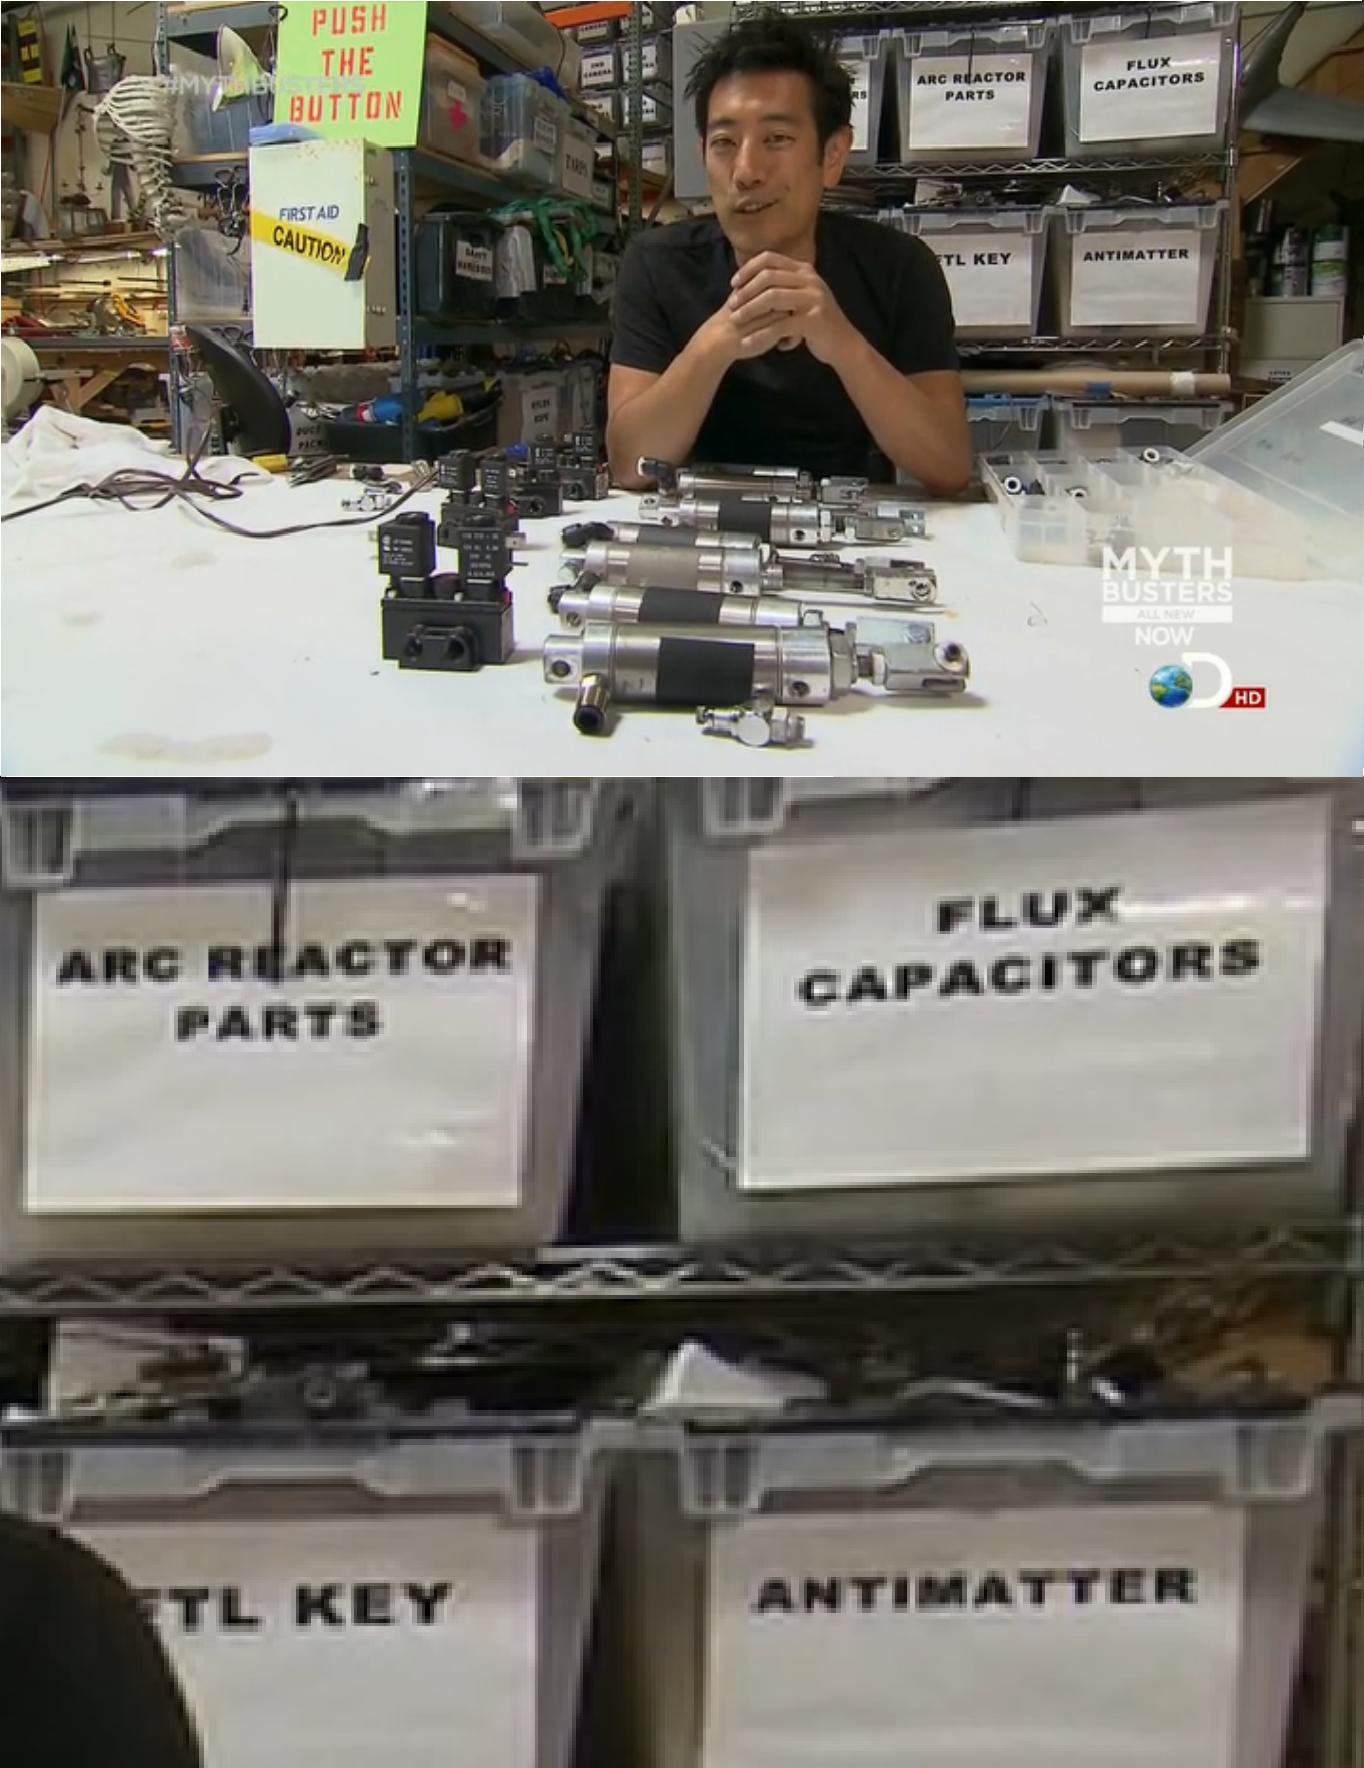 mythbusters memes - Push The Button Arc Reactor Parts Flux Capacitors Firstad Caution Tl Key Antimatter Myth Busters Now Hd Arc Reactor Parts Flux Capacitors Tl Key Antimatter